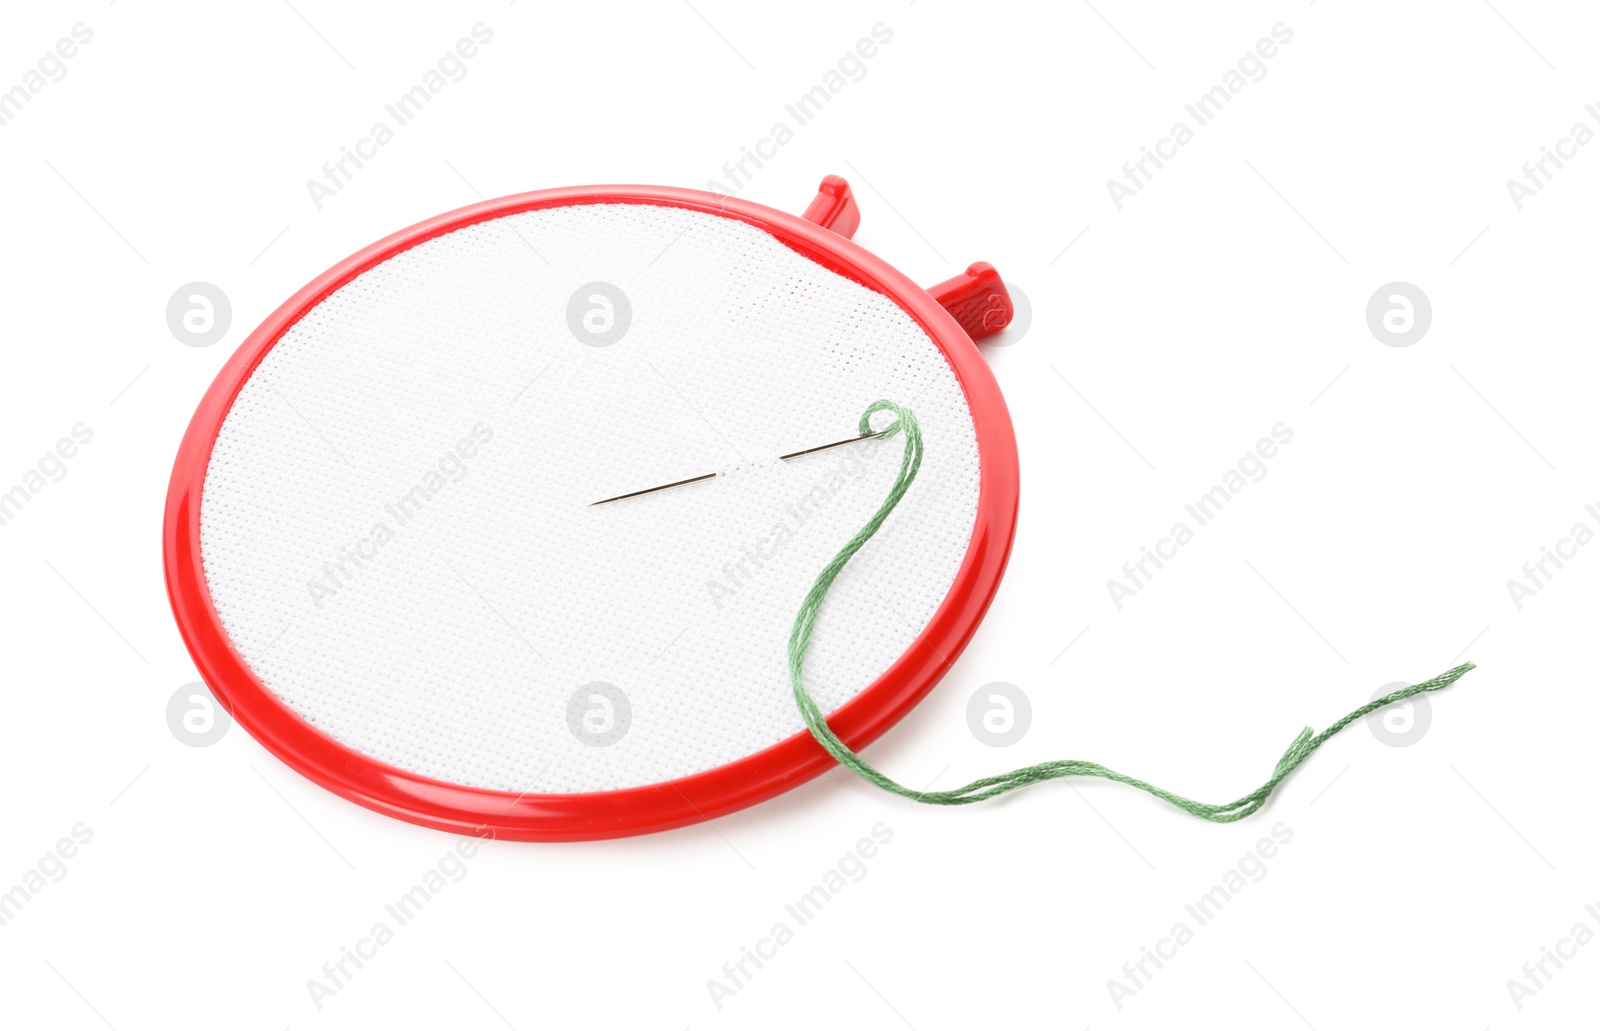 Photo of Embroidery hoop with fabric and needle on white background